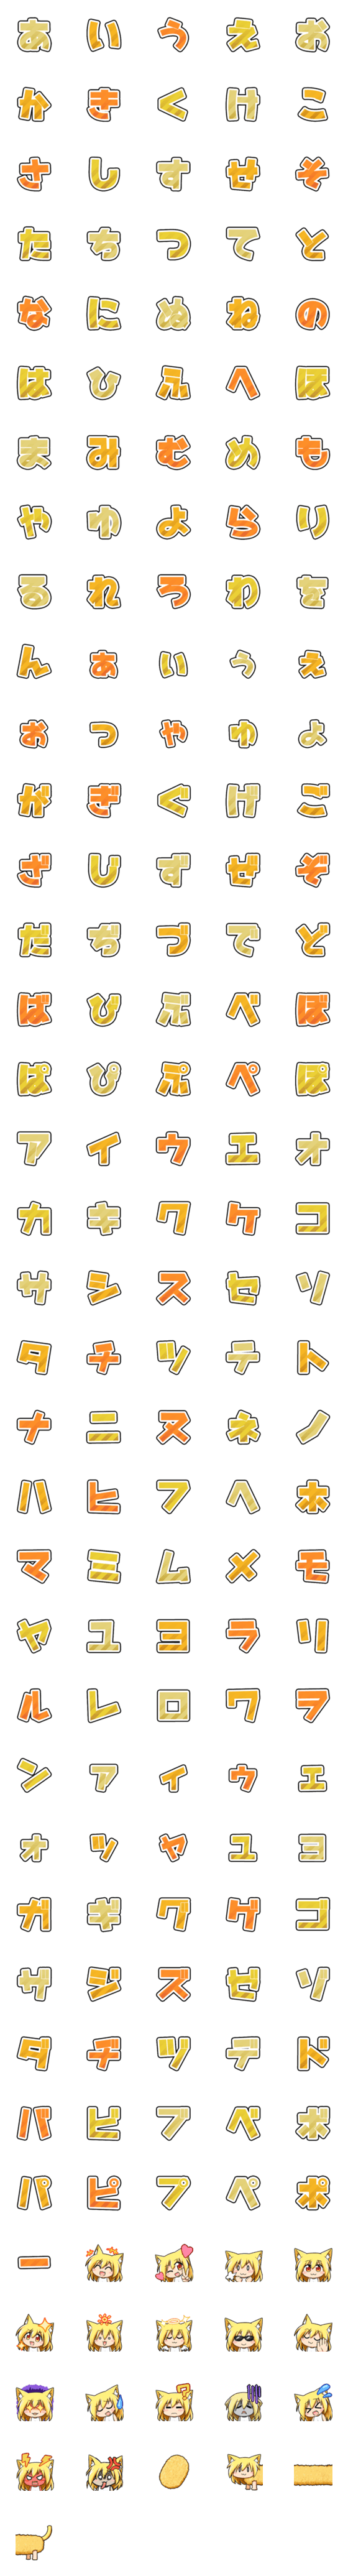 [LINE絵文字]コロッケ妖精☆絵文字の画像一覧